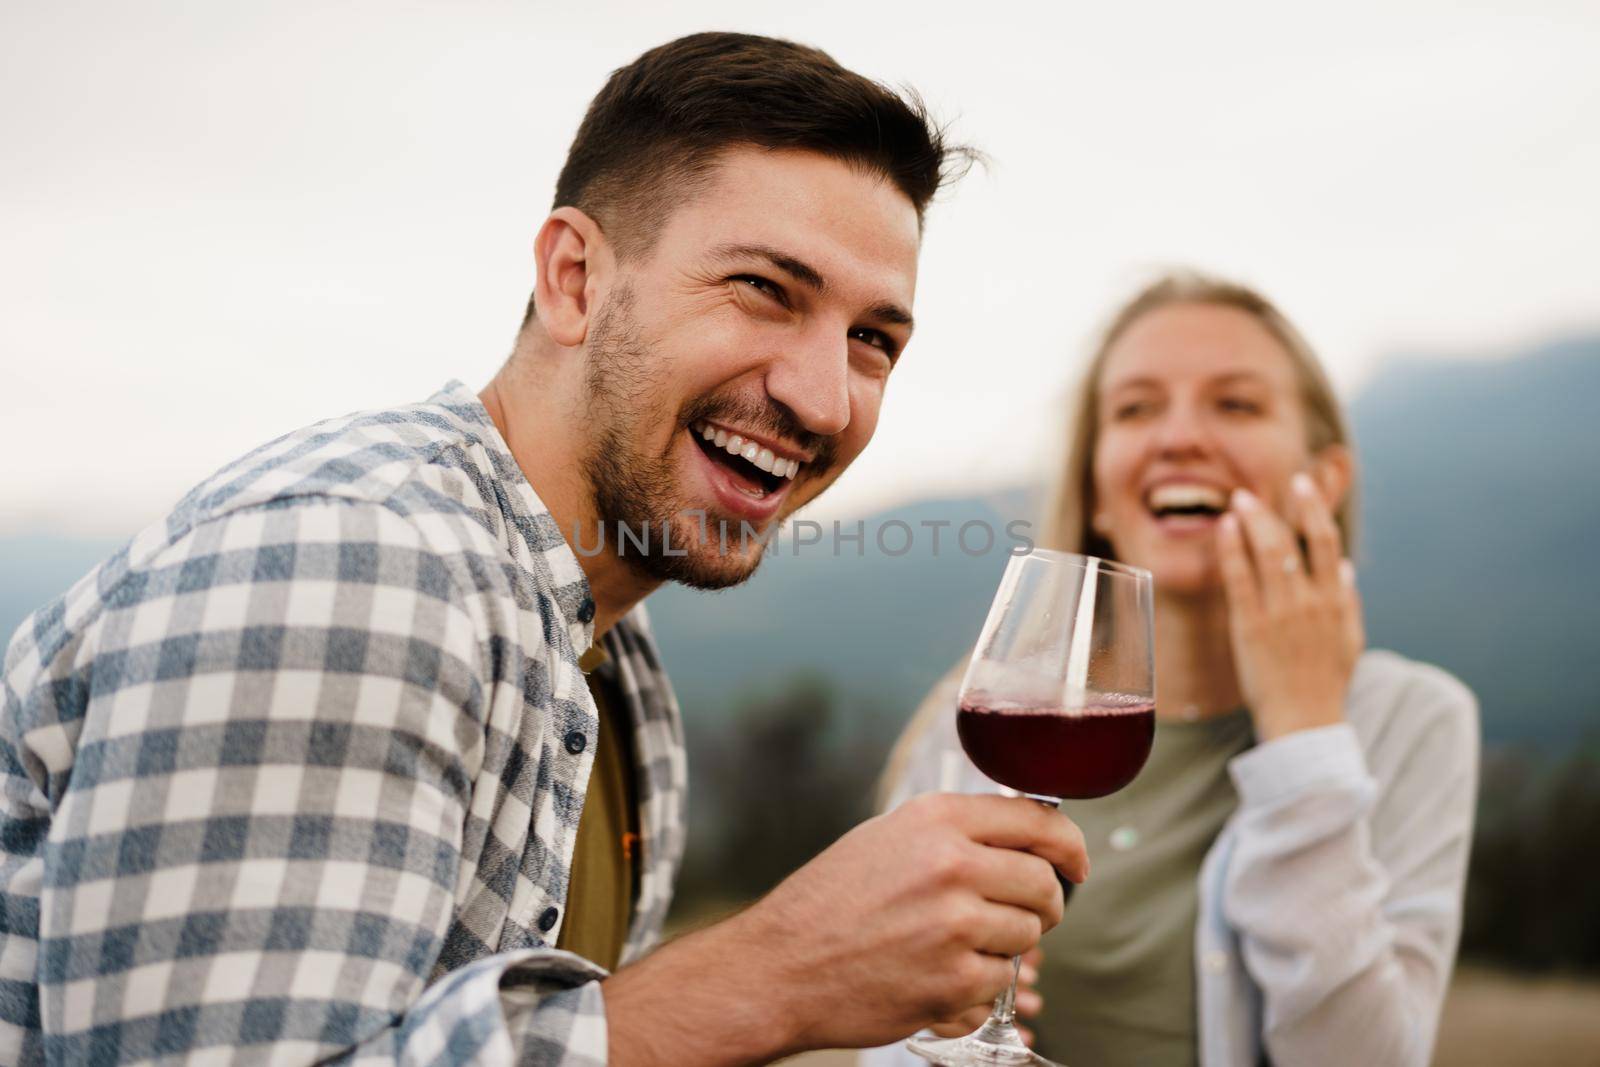 Smiling couple toasting wine glasses outdoors in mountains, close up portrait